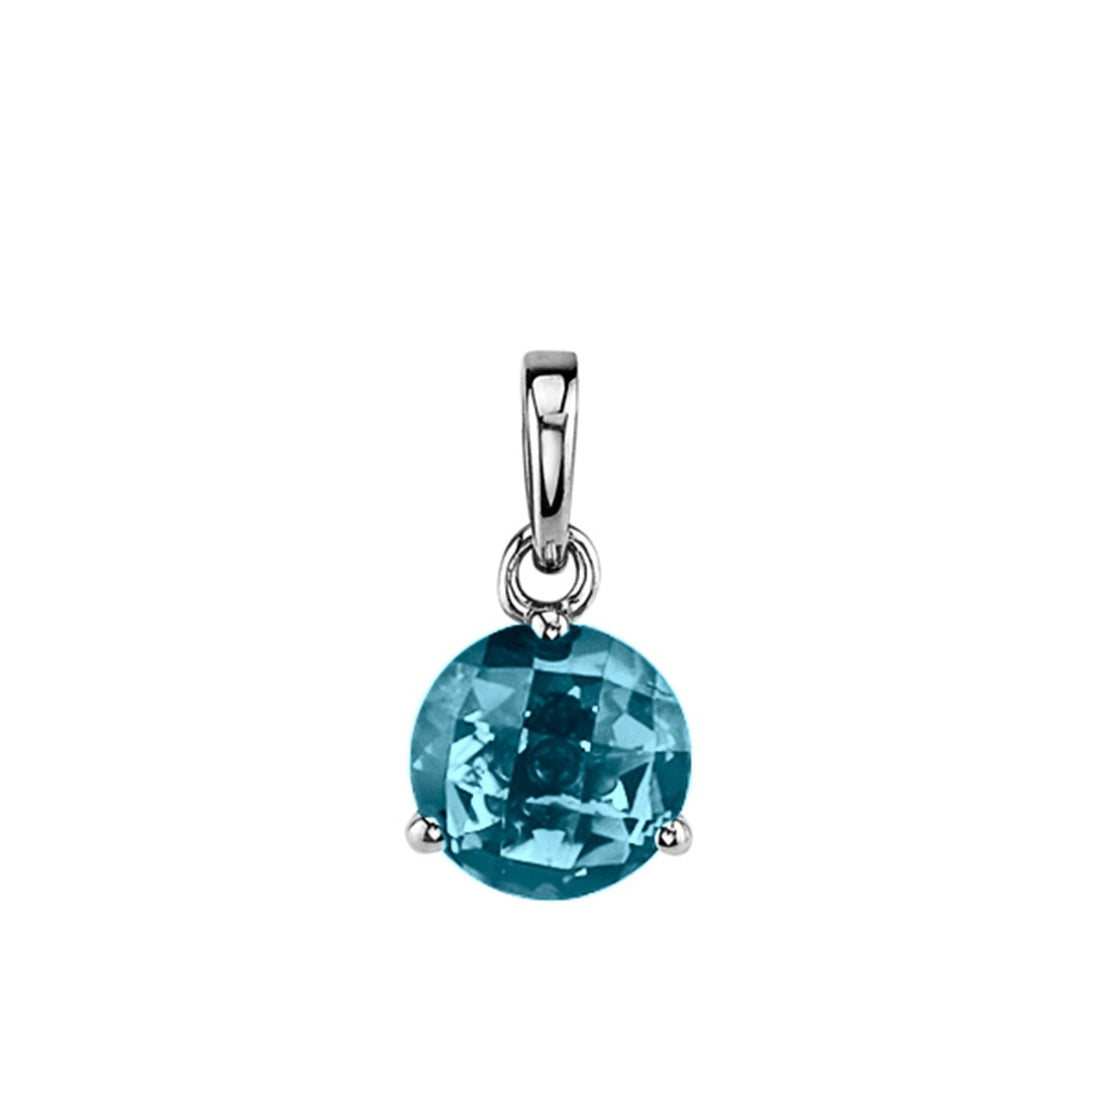 London Blue Topaz Gold Pendant by Stanton Color - Skeie's Jewelers